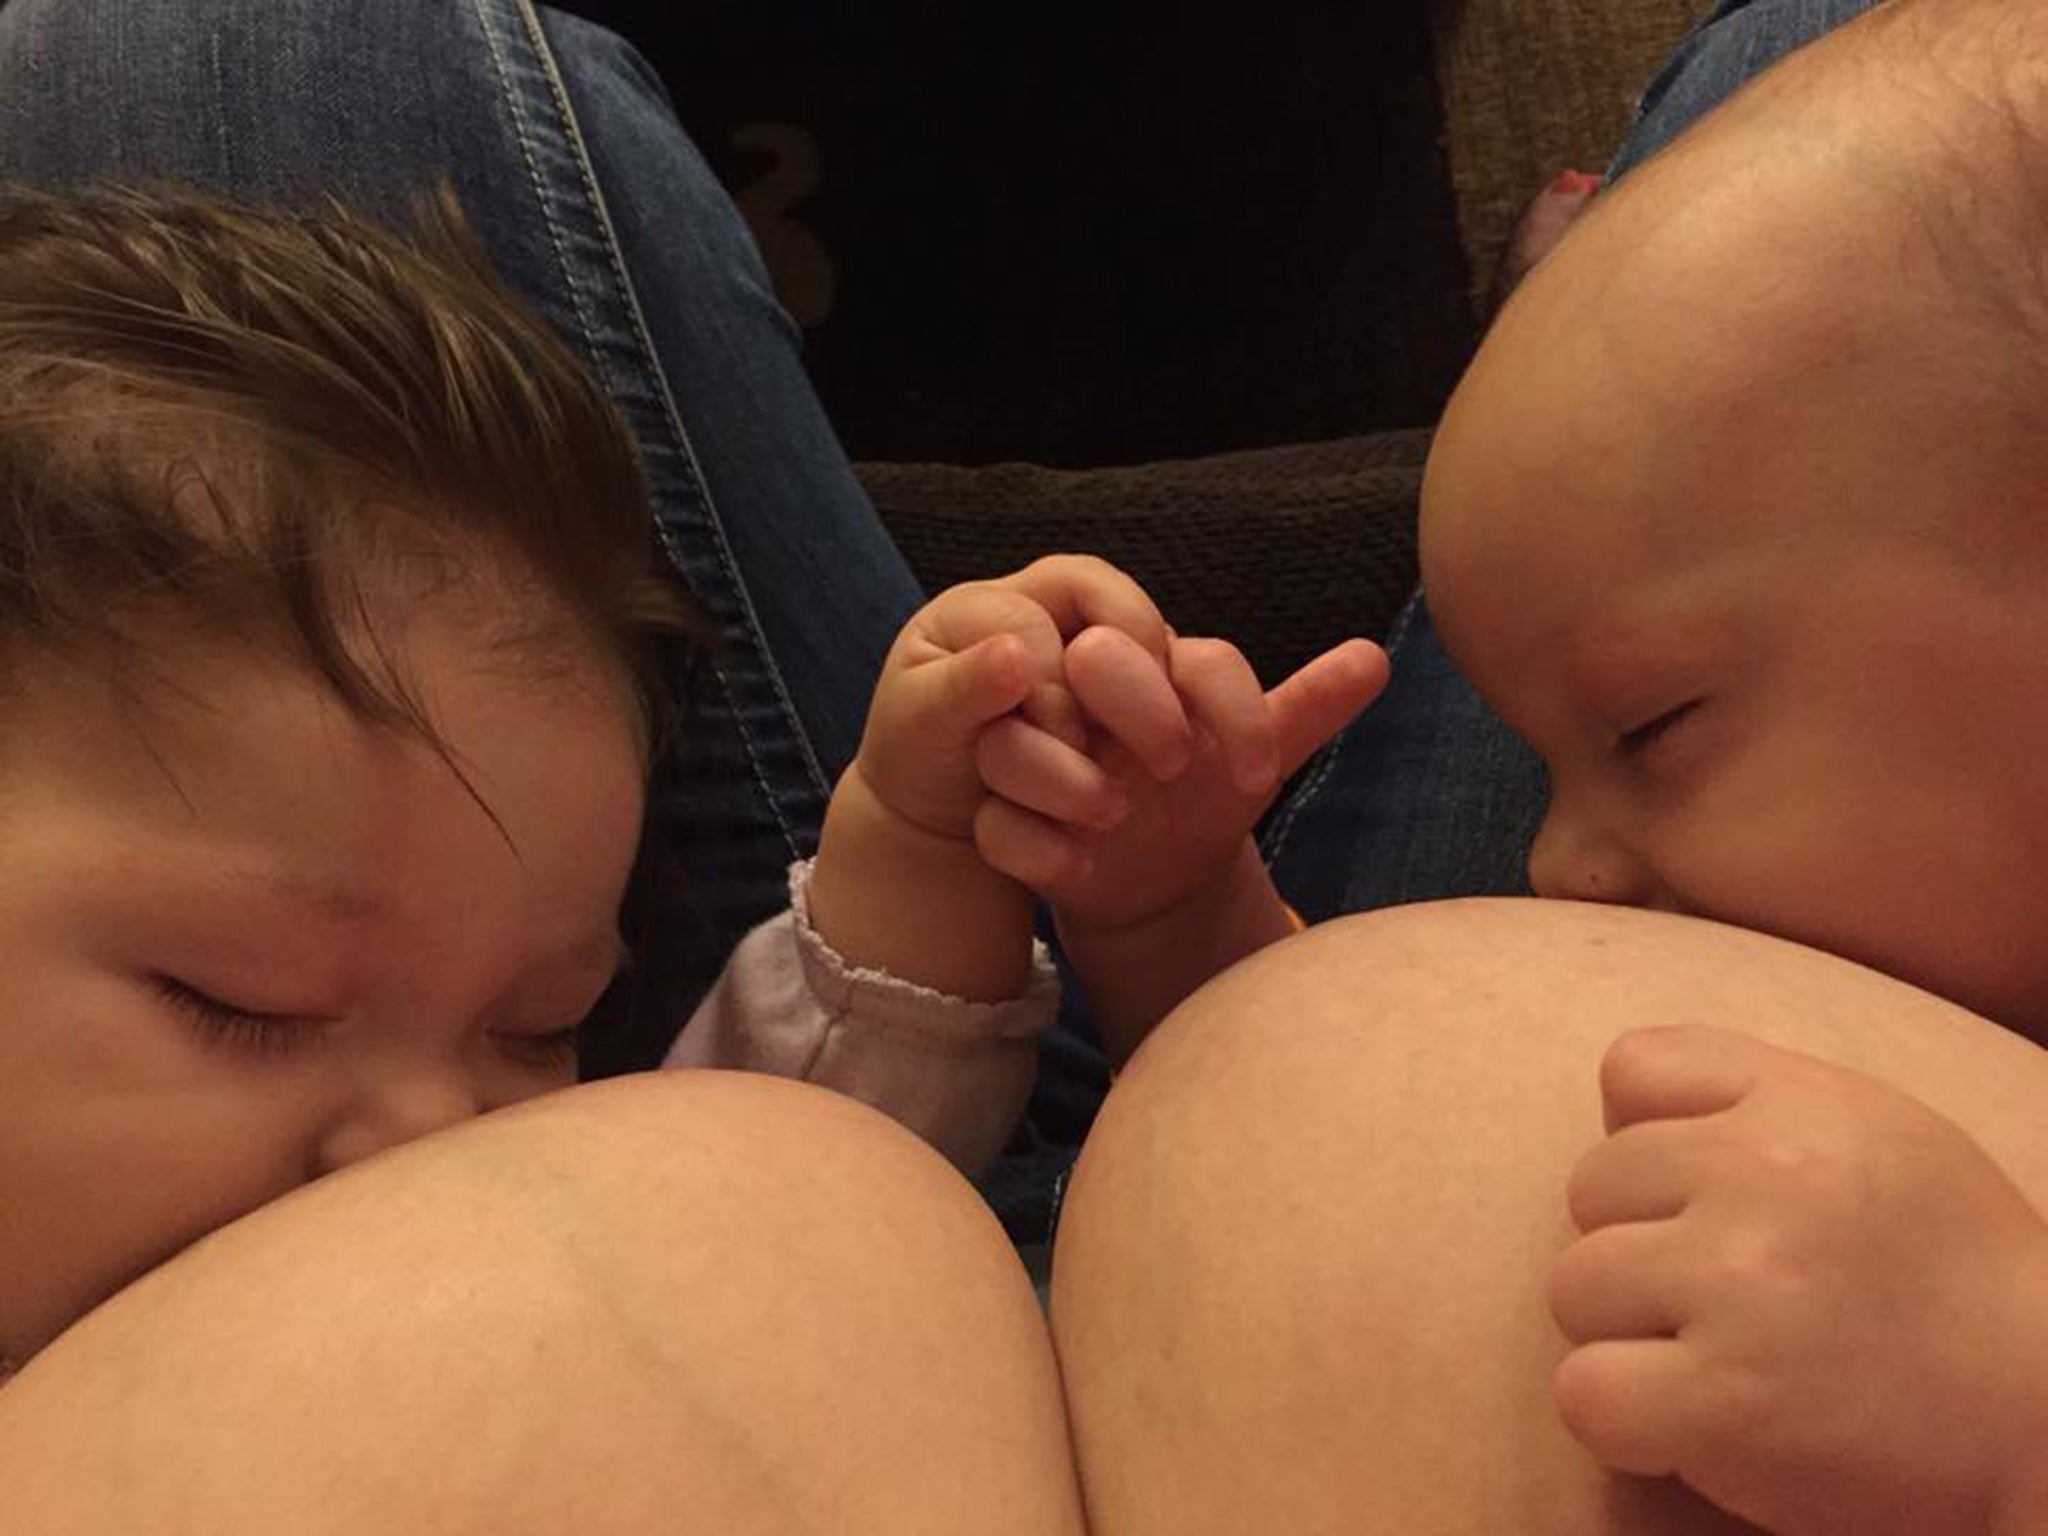 Rebecca Wanosik uploaded the picture of the two babies holding hands as they feed